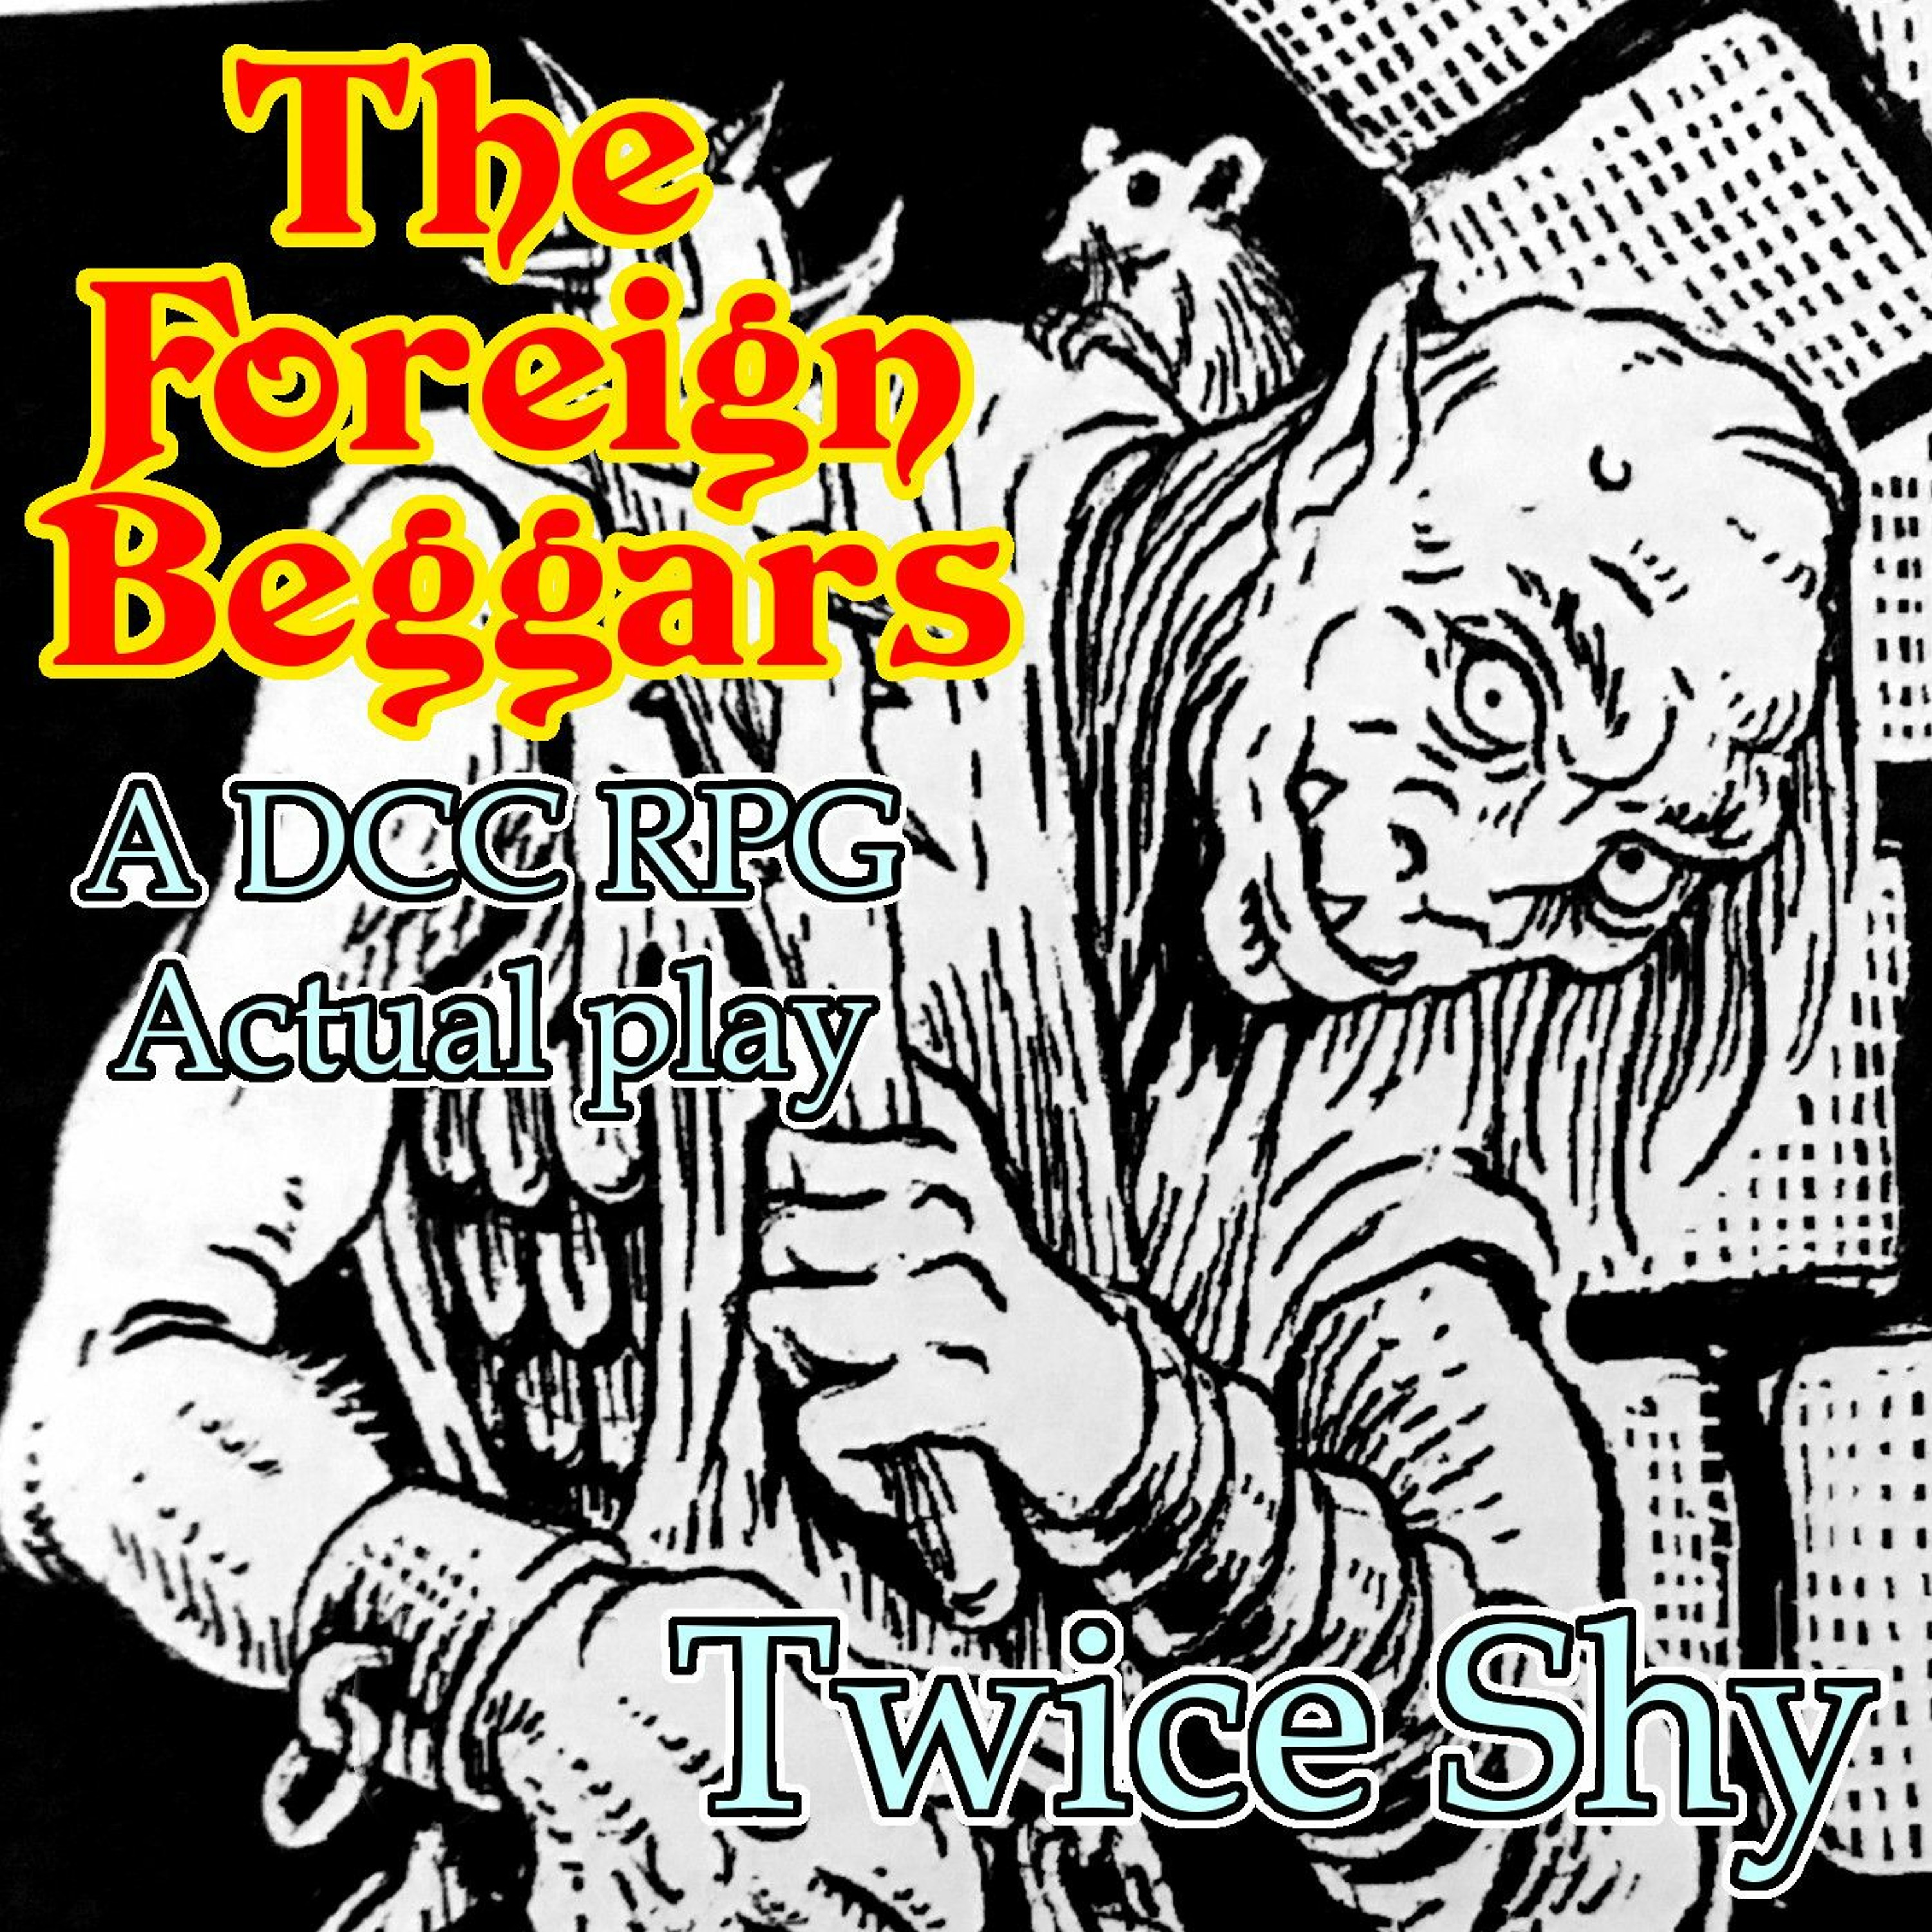 The Foreign Beggars 05 - Twice Shy (DCC RPG Actual play)